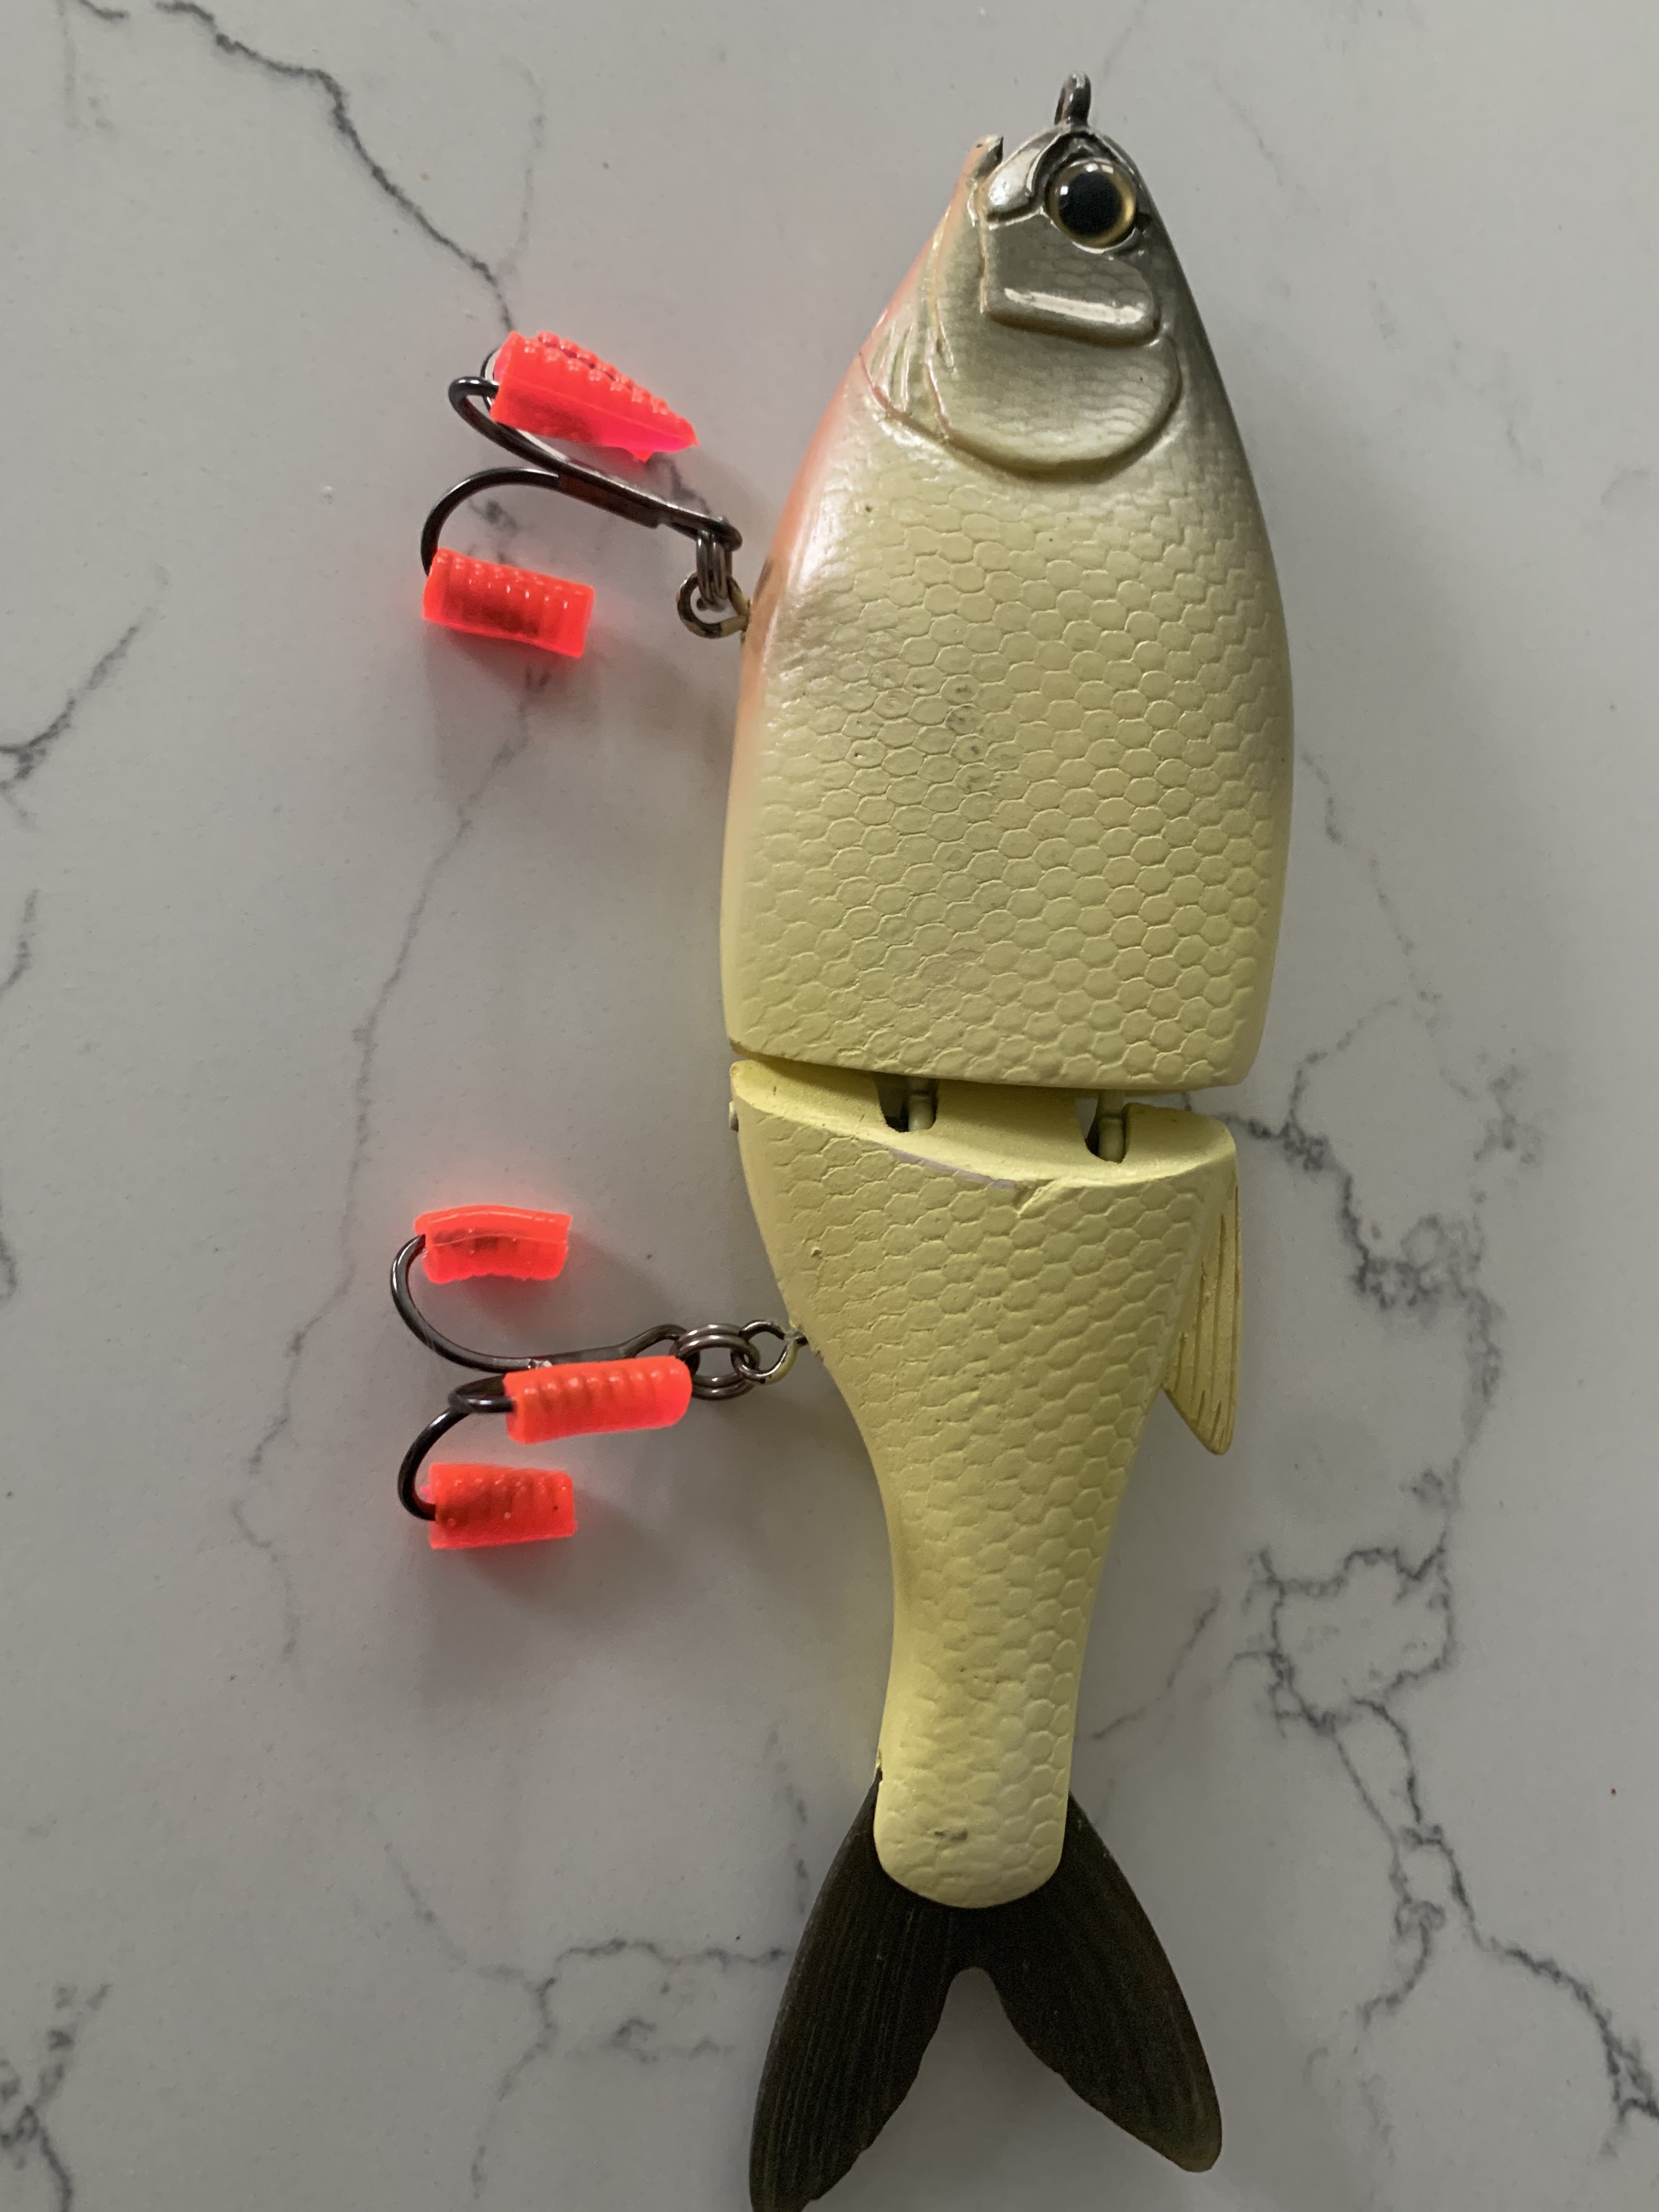 Some 🔥 Joey Shad's return from @rafacustombaits! We just got a fresh  shipment of the Joey Shad in Bone 🦴. This is an 8” 4 oz